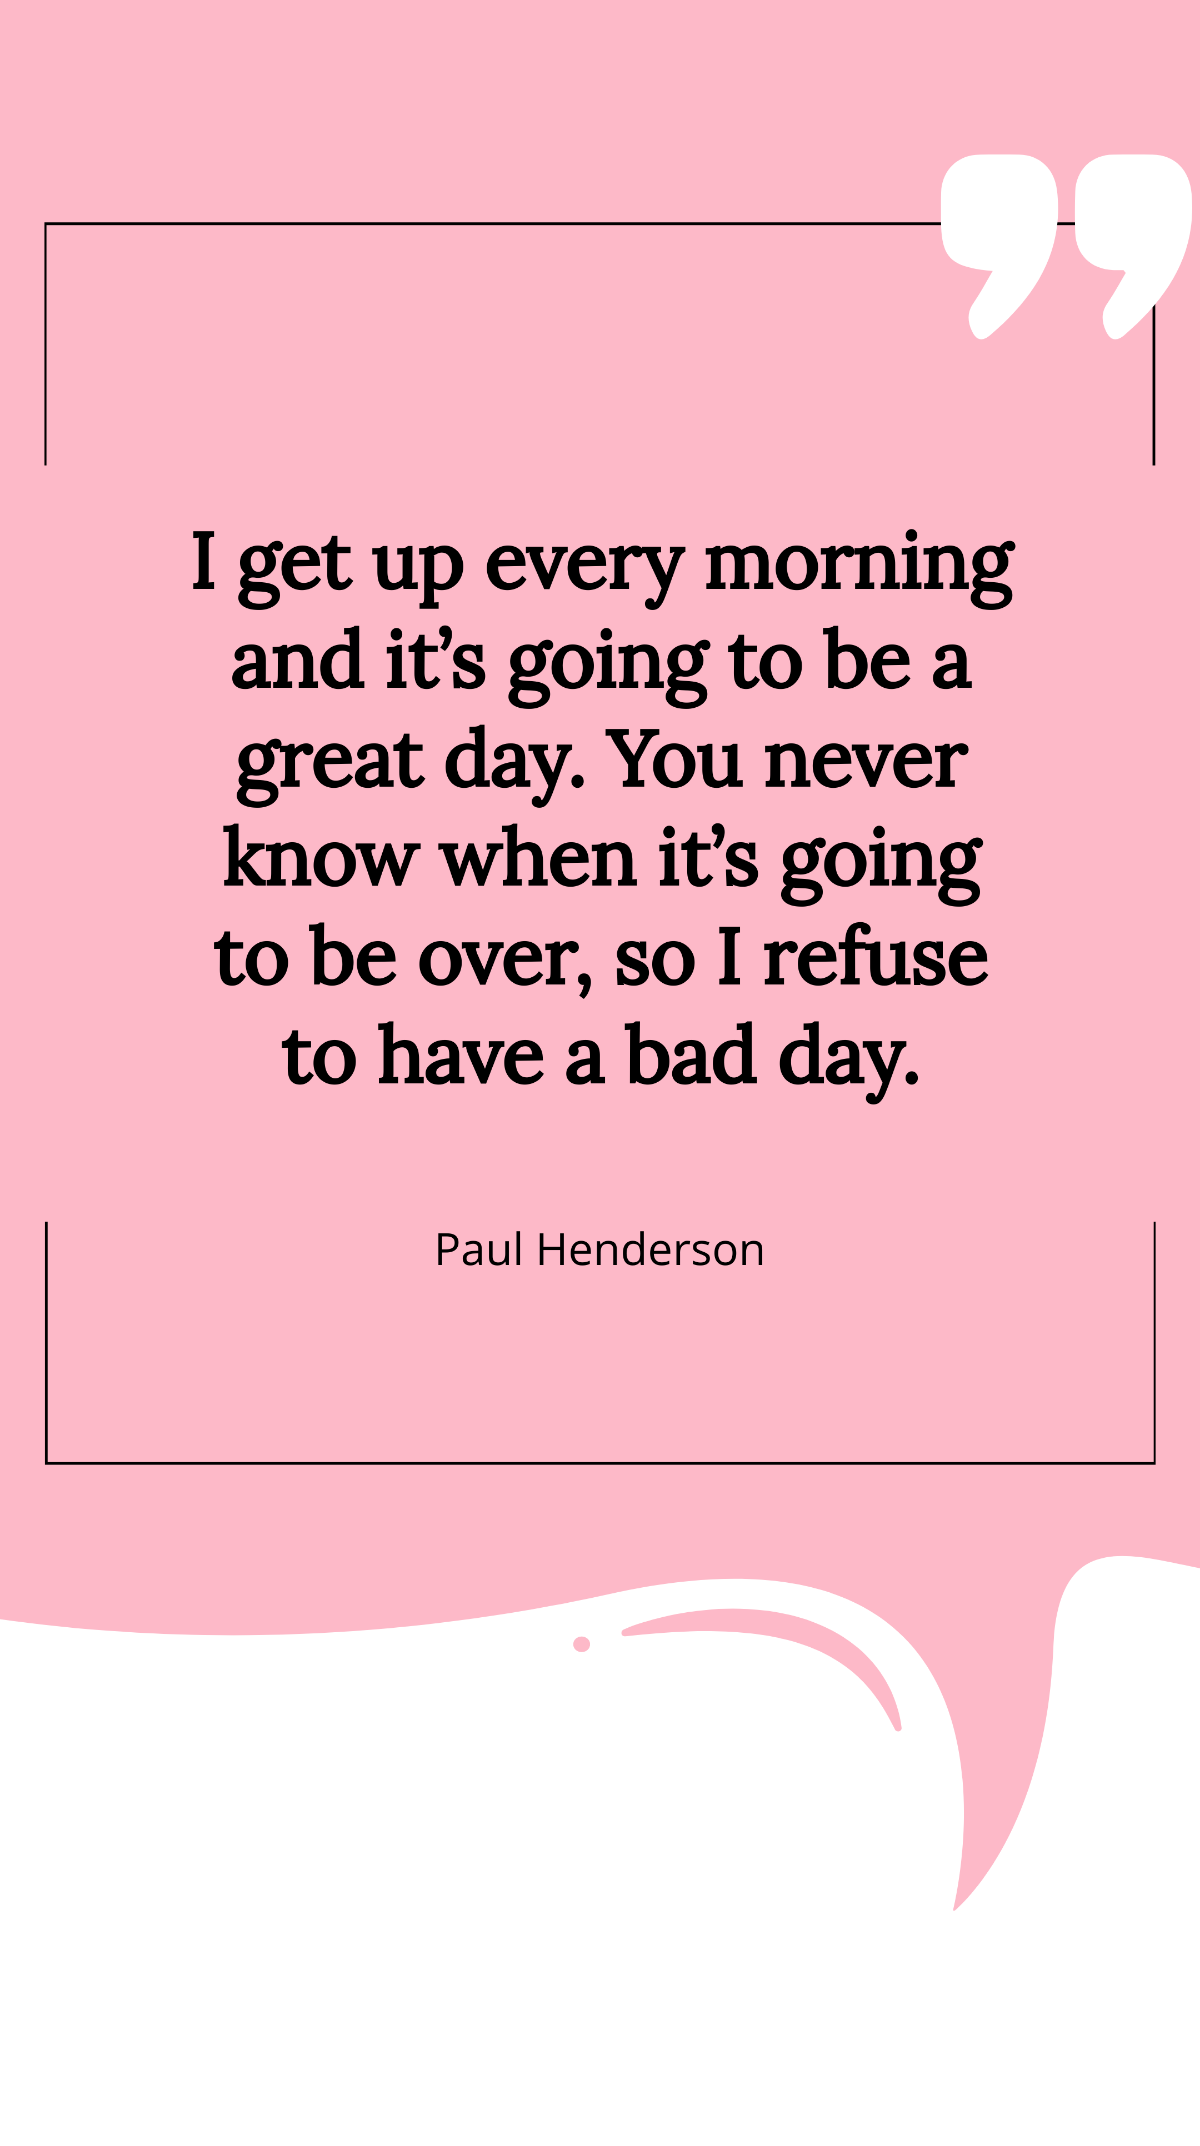 Paul Henderson - I get up every morning and it’s going to be a great day. You never know when it’s going to be over, so I refuse to have a bad day. Template